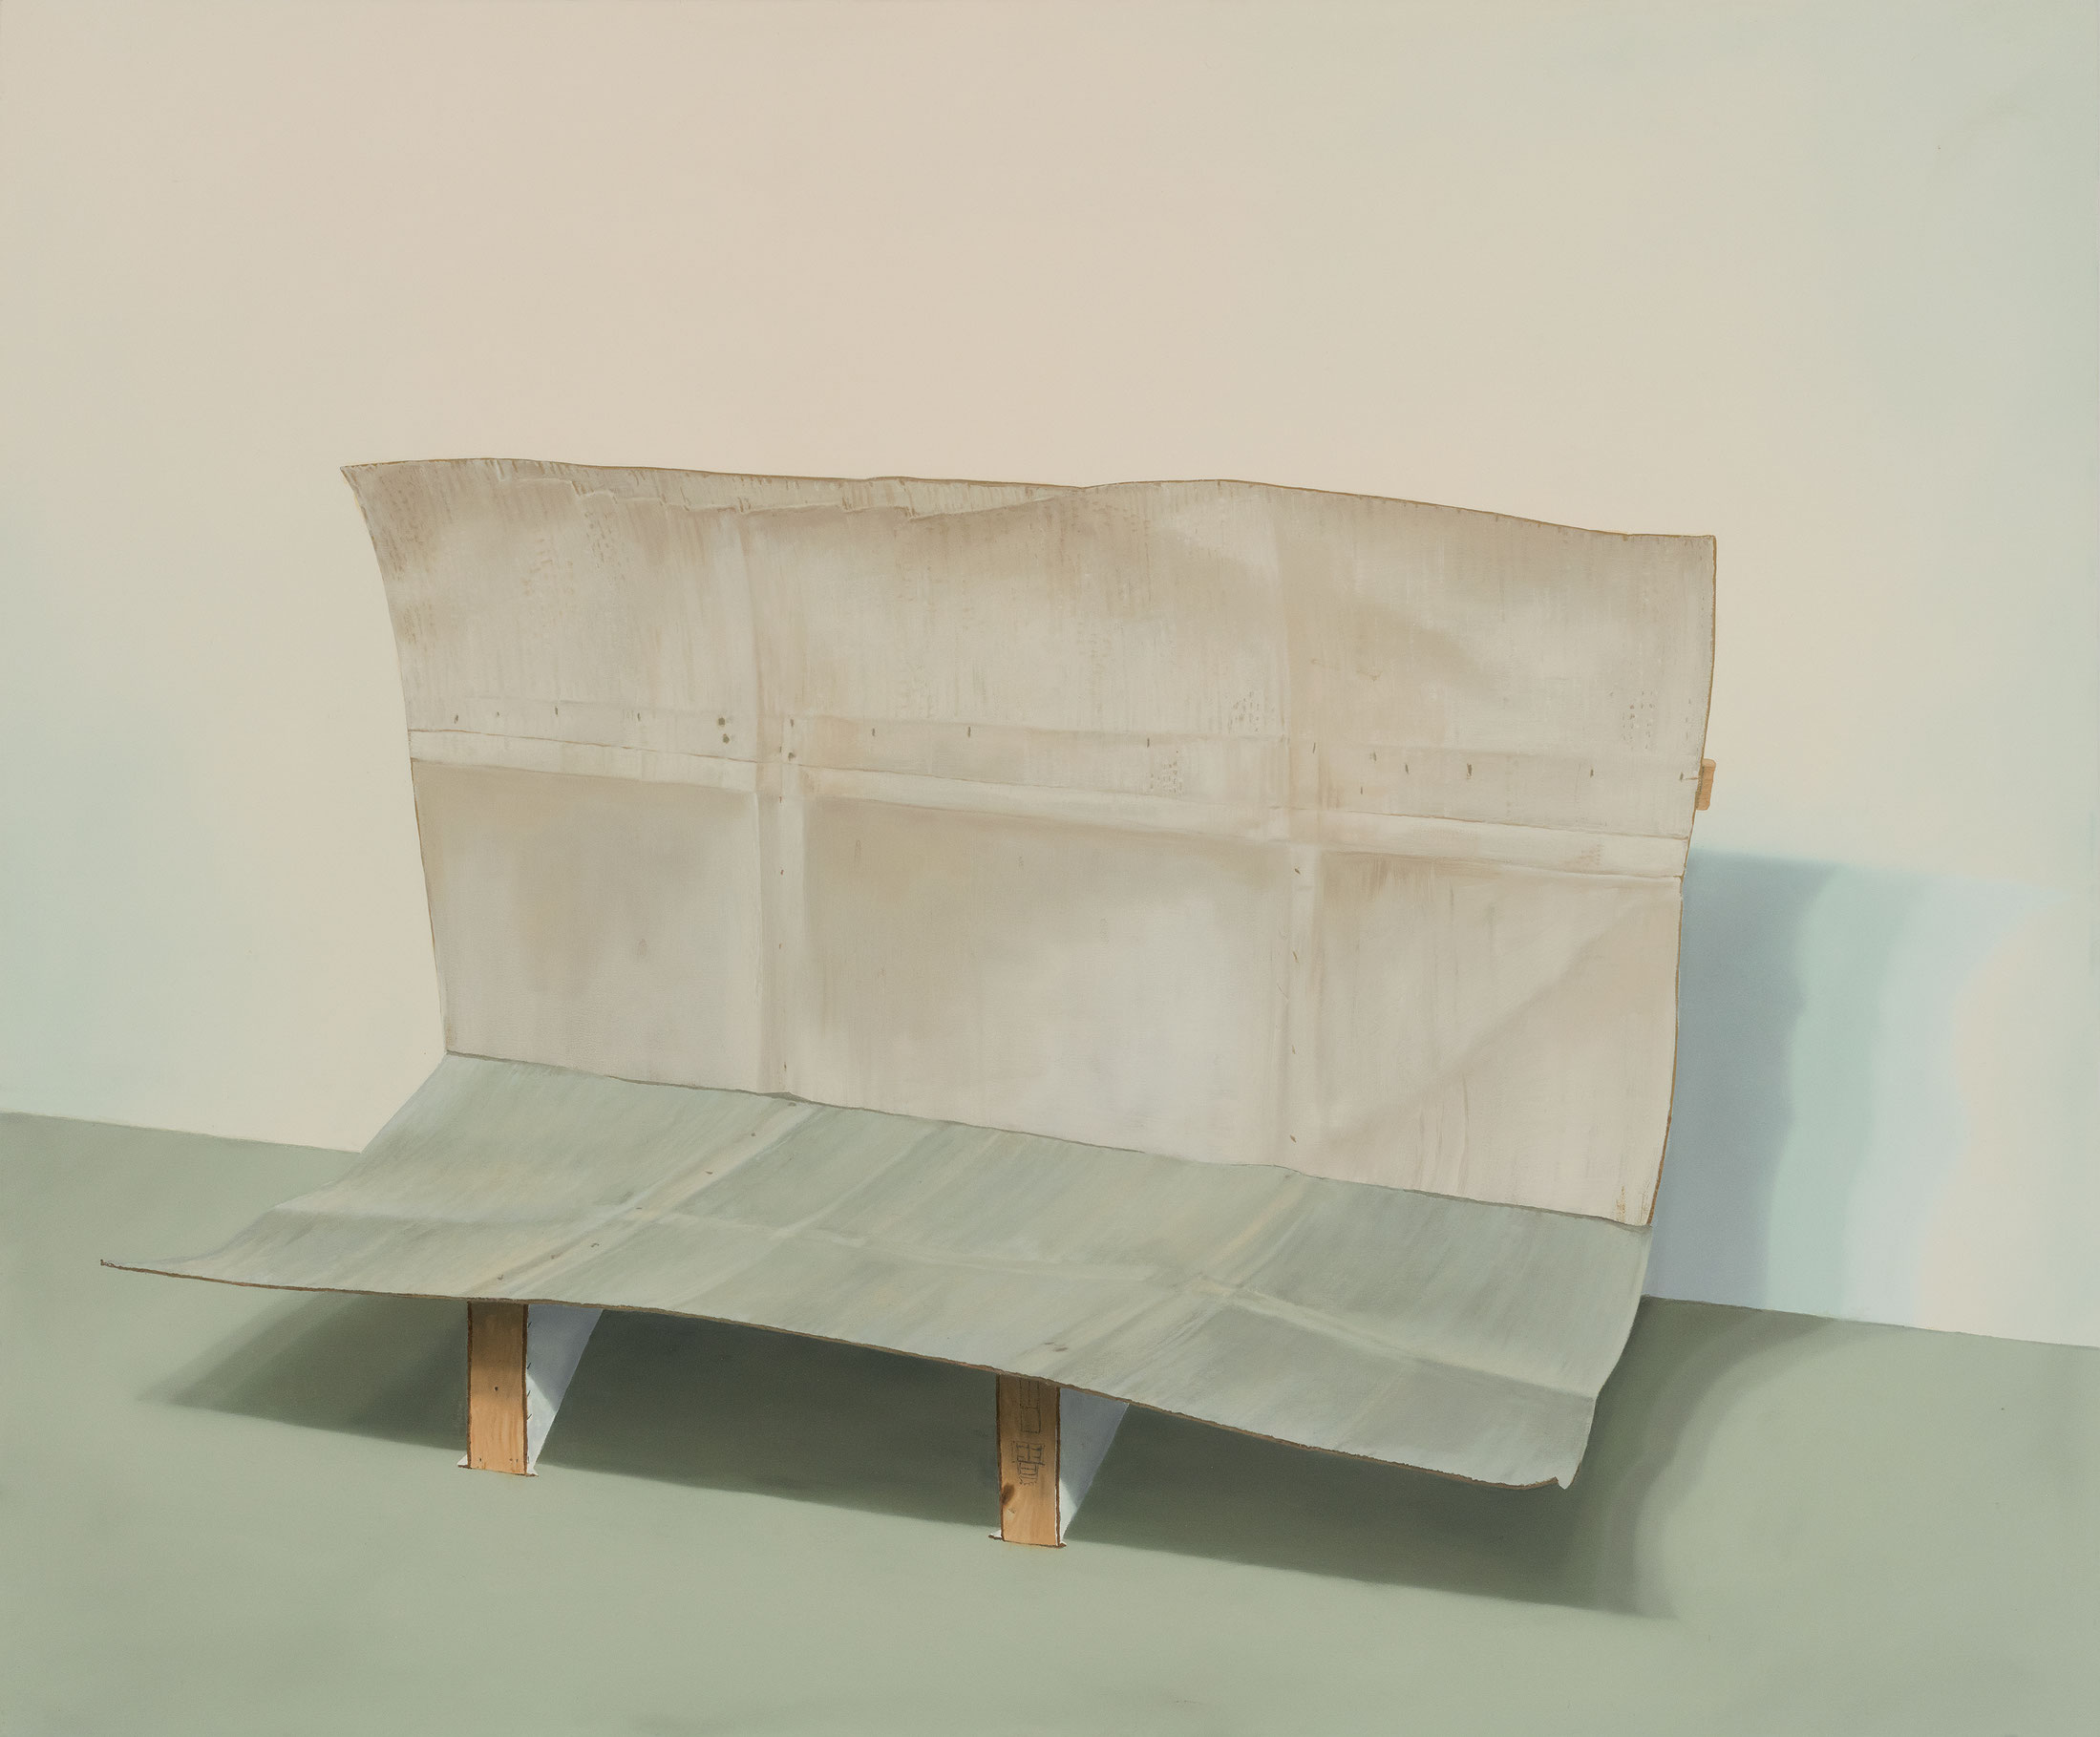 Maquette of Wall and Floor, 2008, Anthony Burnham, Huile sur toile.